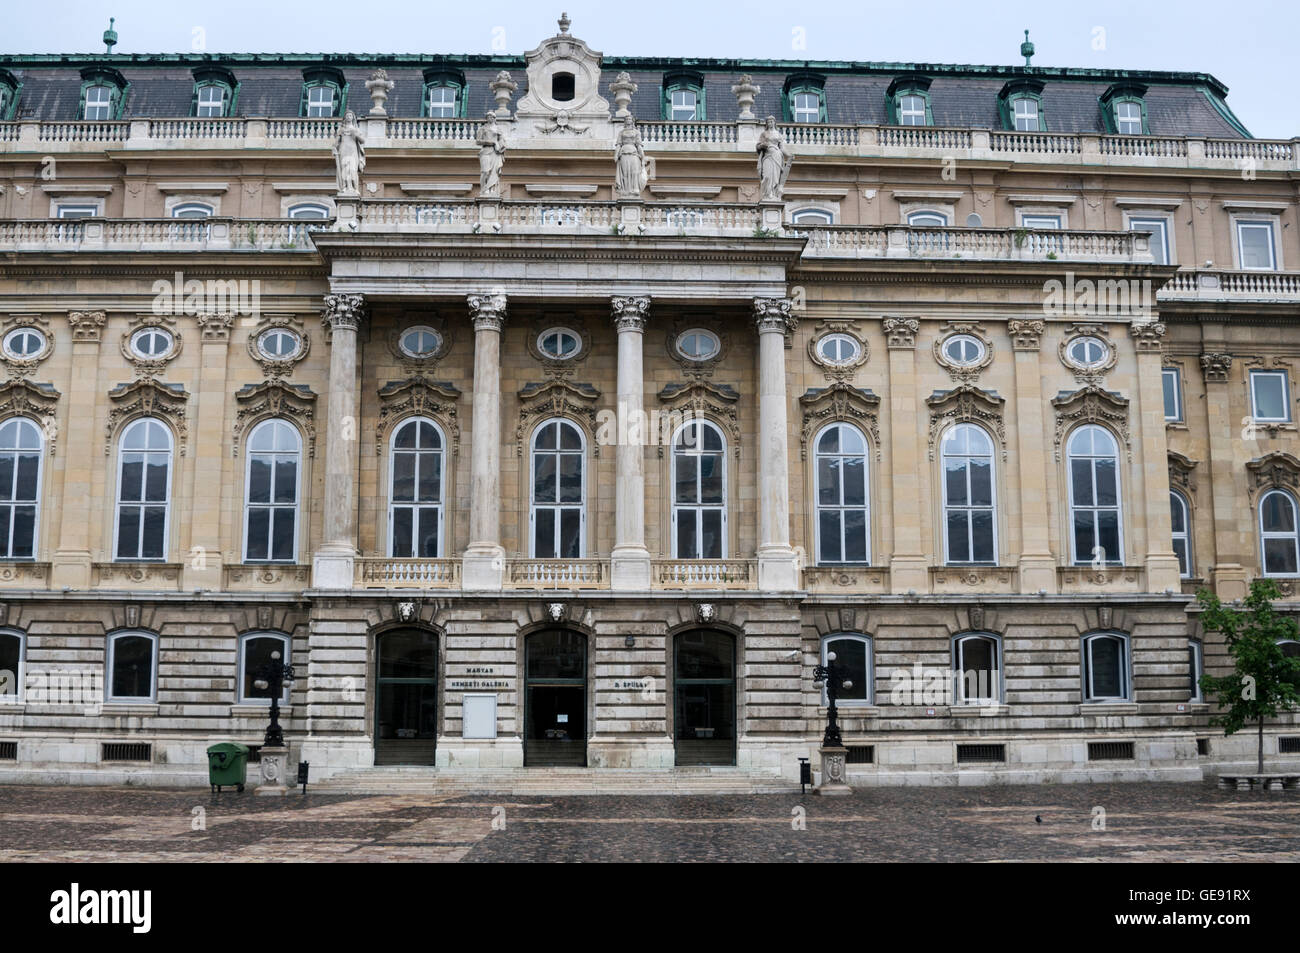 The Hungarian National Gallery (former Royal Palace) on Buda Castle Hill in Budapest, Hungary. The National Gallery is a national art museum Stock Photo